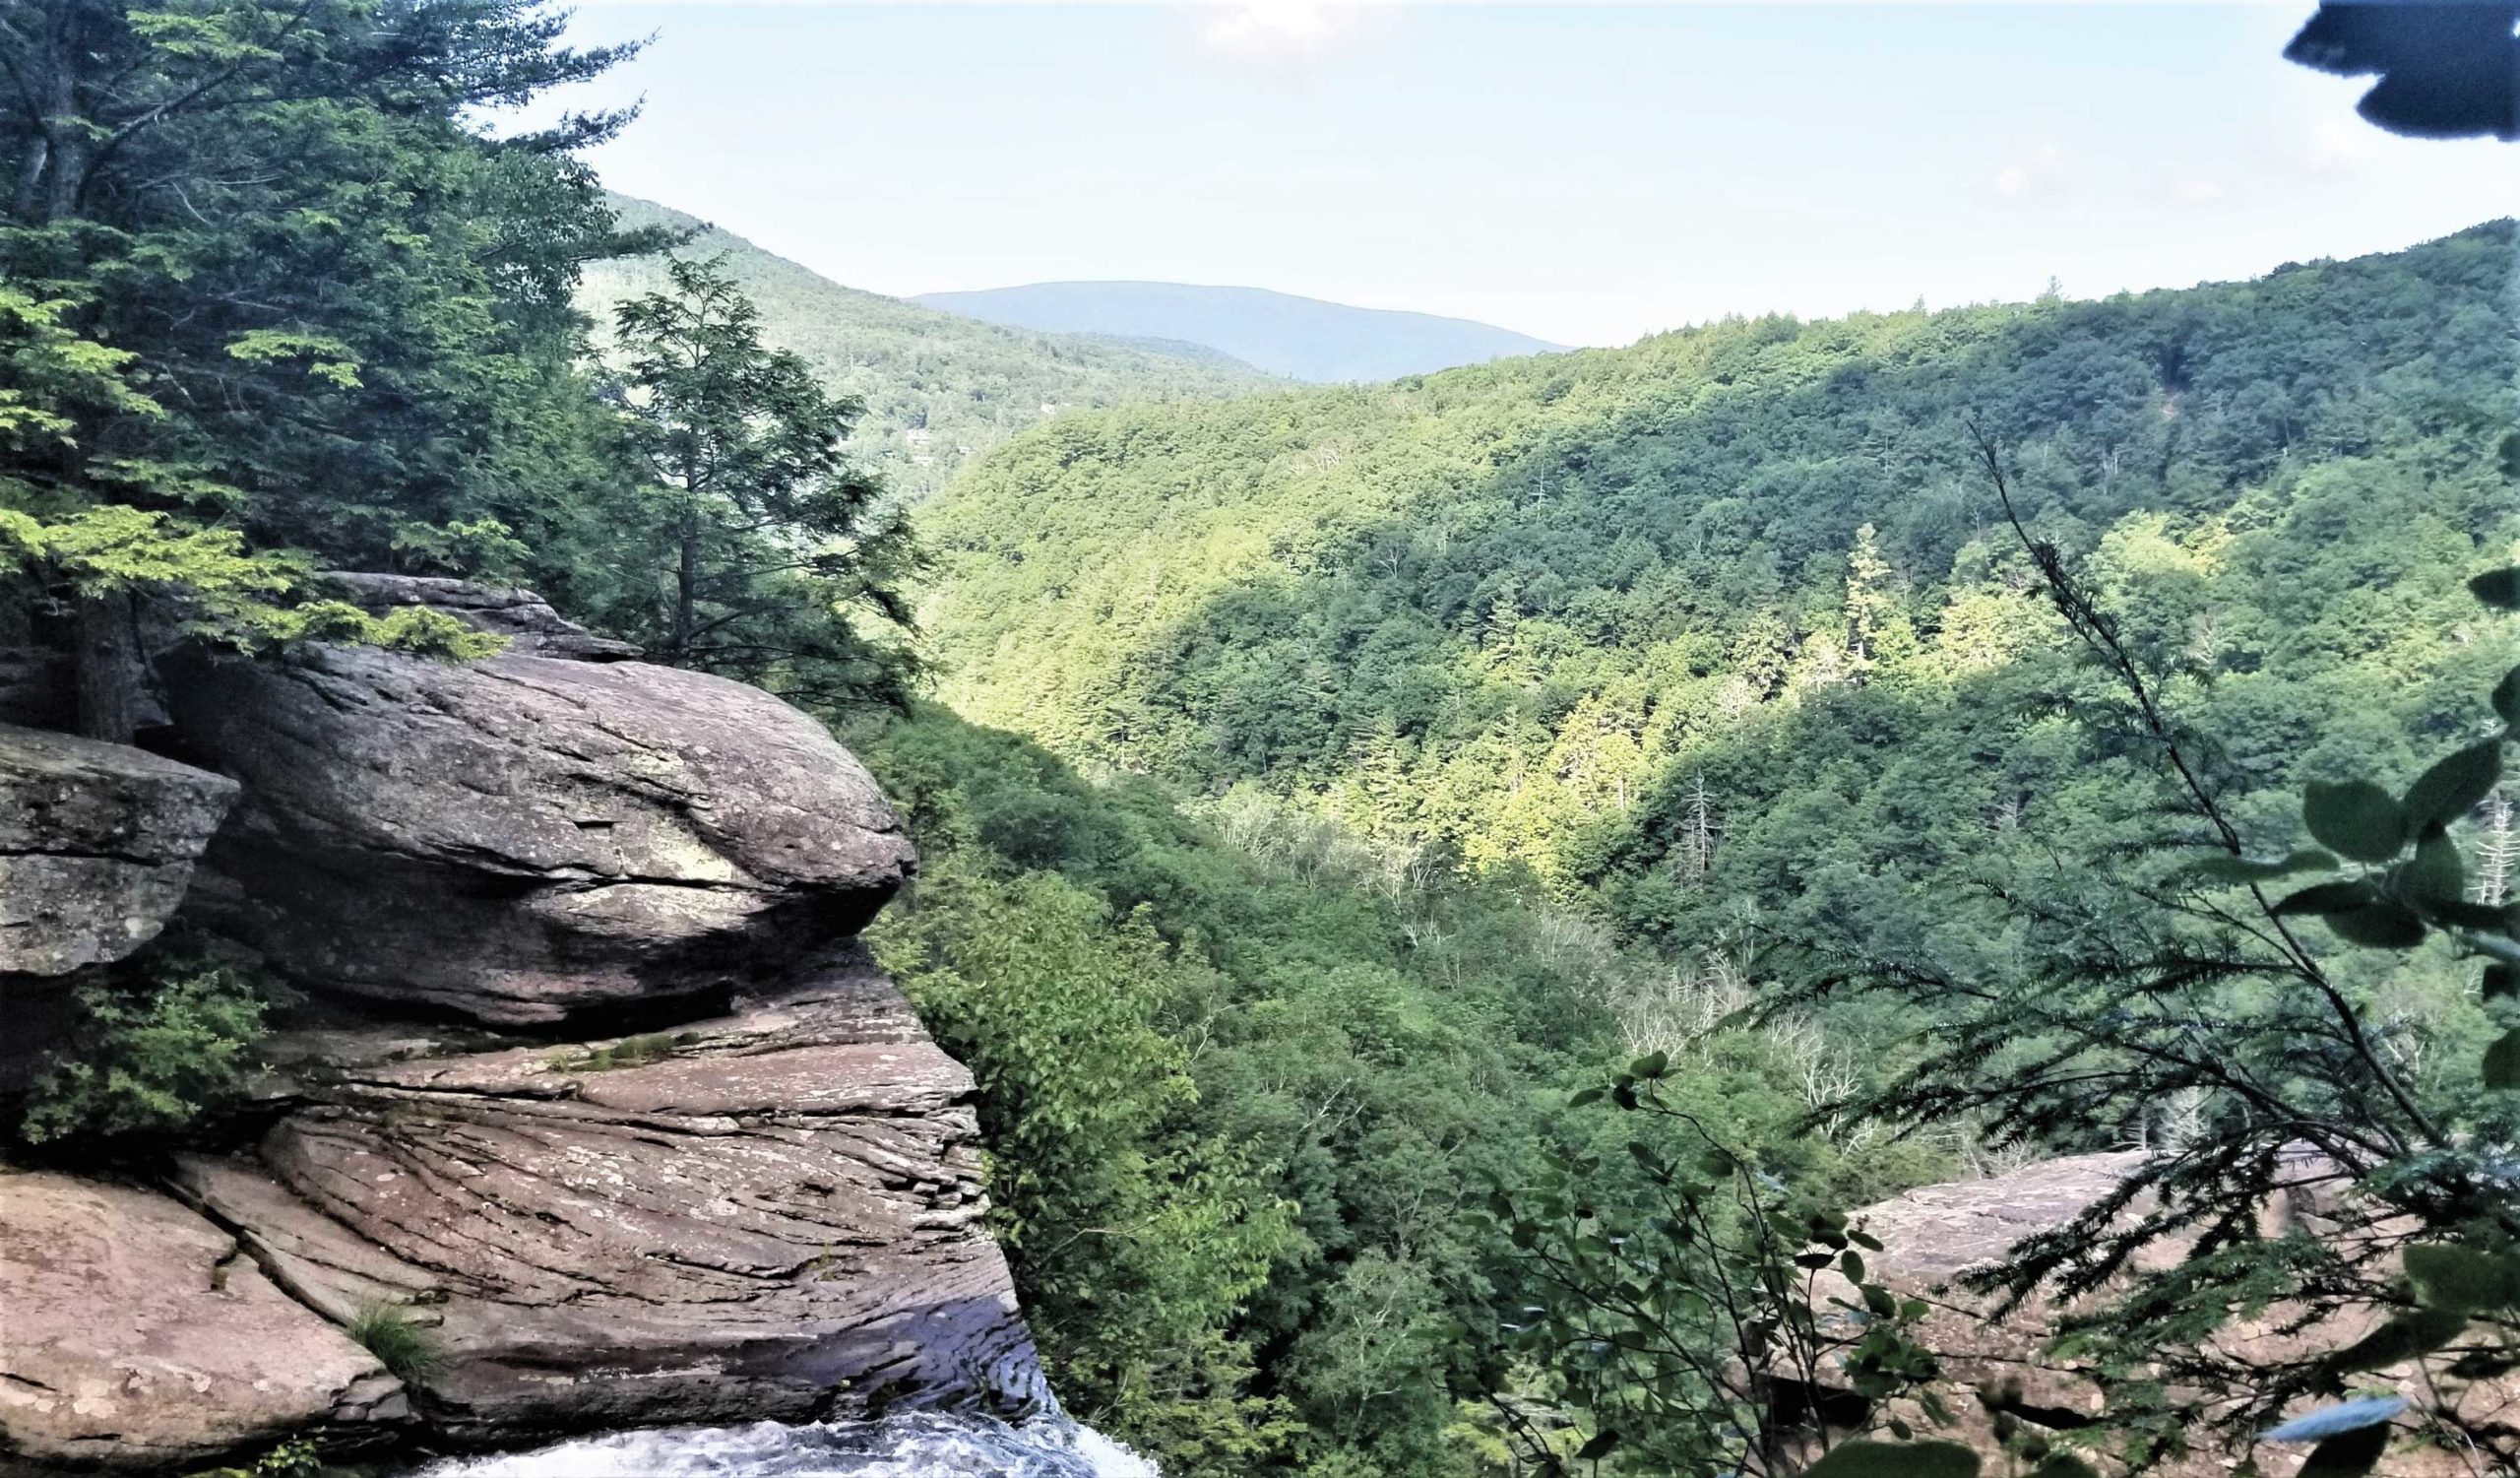 Looking down from the top of Kaaterskill Falls today